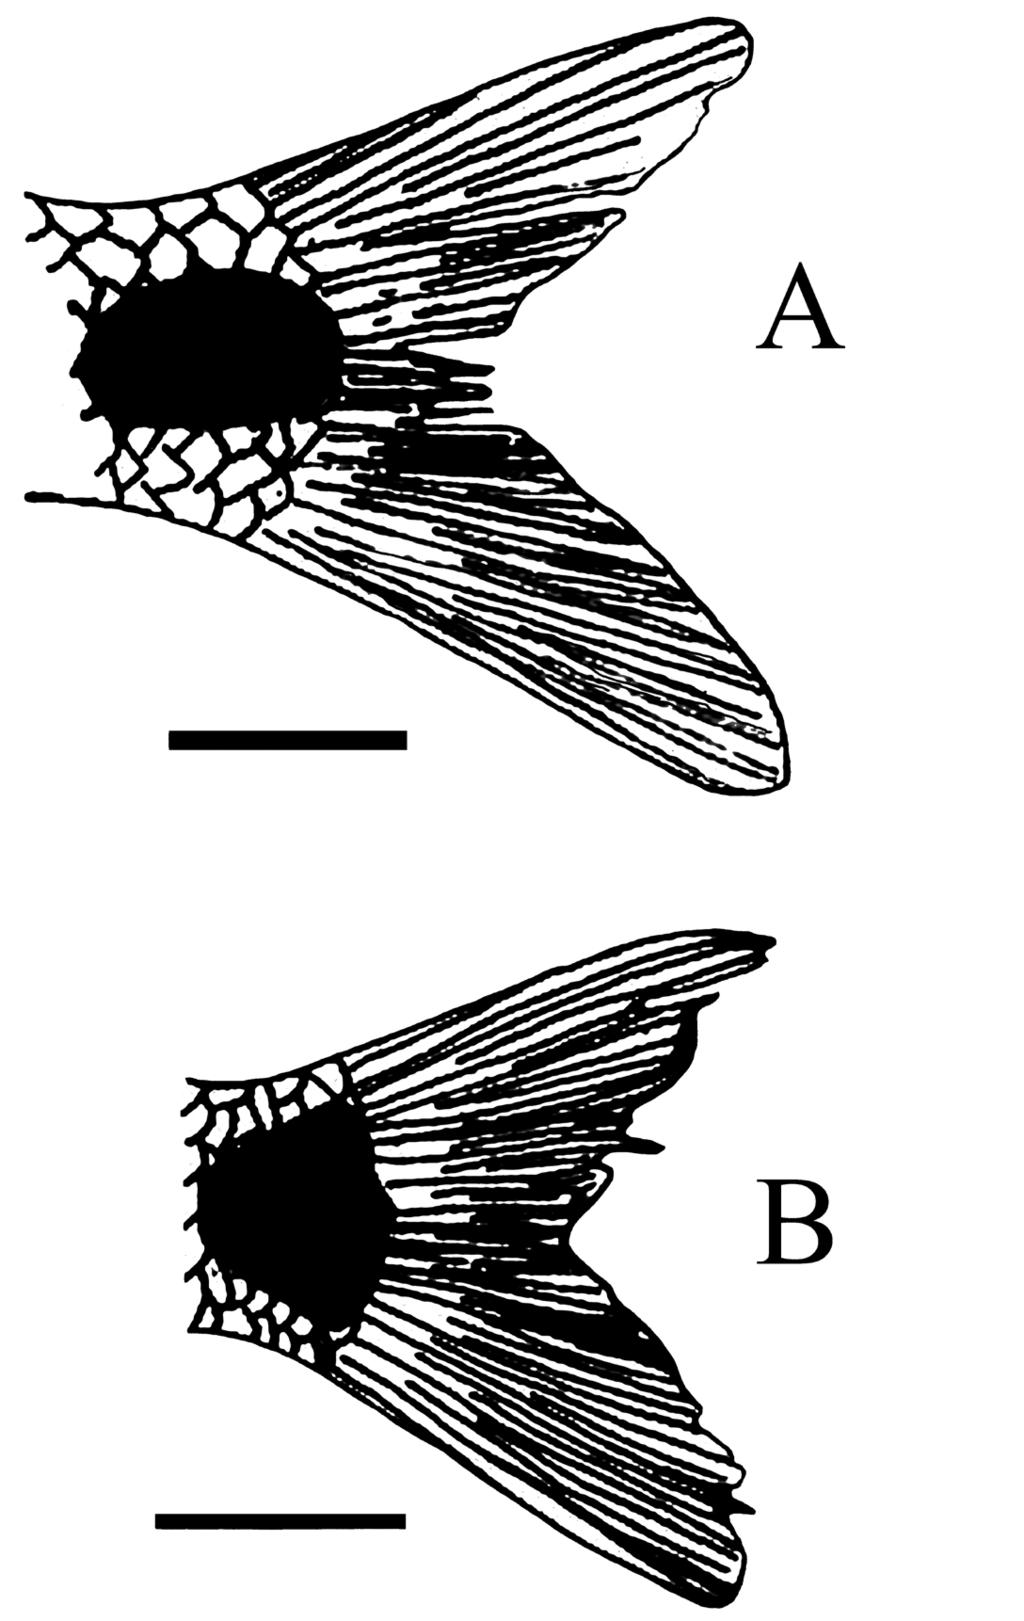 Material examined RUIZ-C. R.I. et al., Revision of the Astyanax orthodus species-group Holotype COLOMBIA: 83.